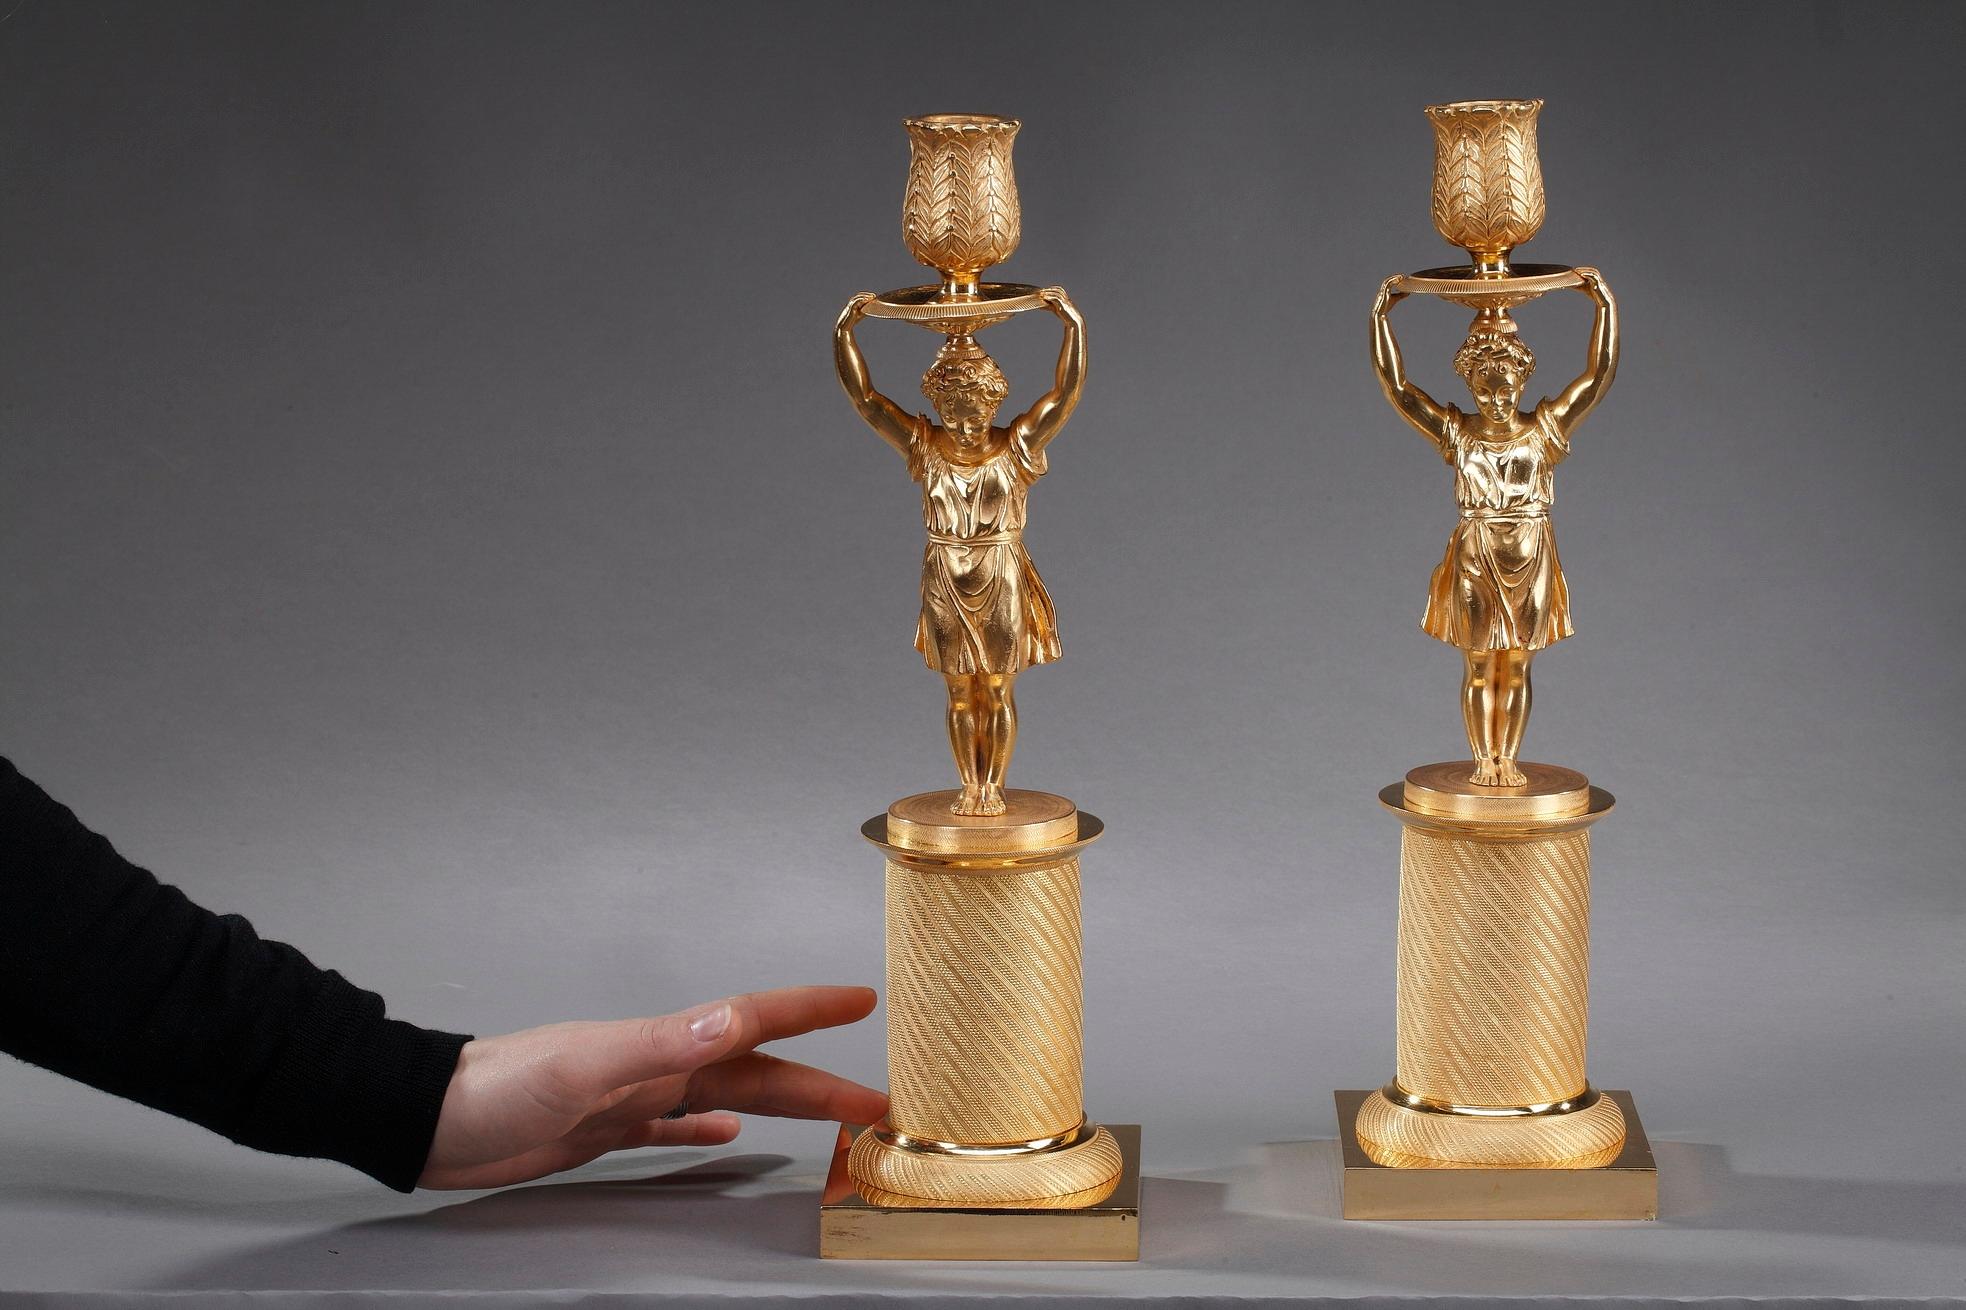 Pair of small restauration candlesticks crafted of gilt bronze featuring a girl standing up on a circular pedestal chiseled with twisted patterns, above a square plinth. She wears a floting dress and holds over her head the socket highlighted with